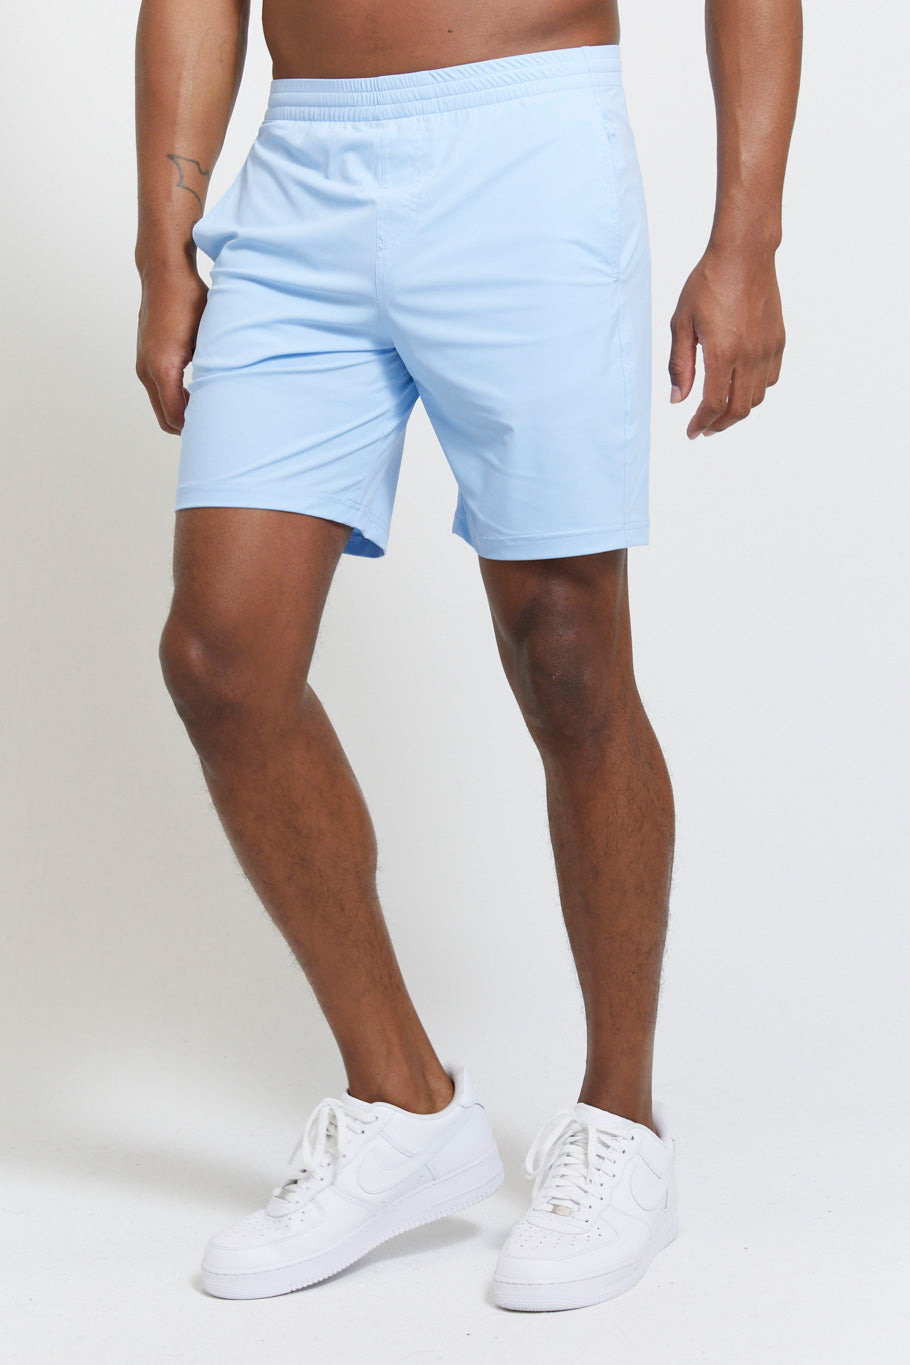 Image of the byron tennis short in skydiver